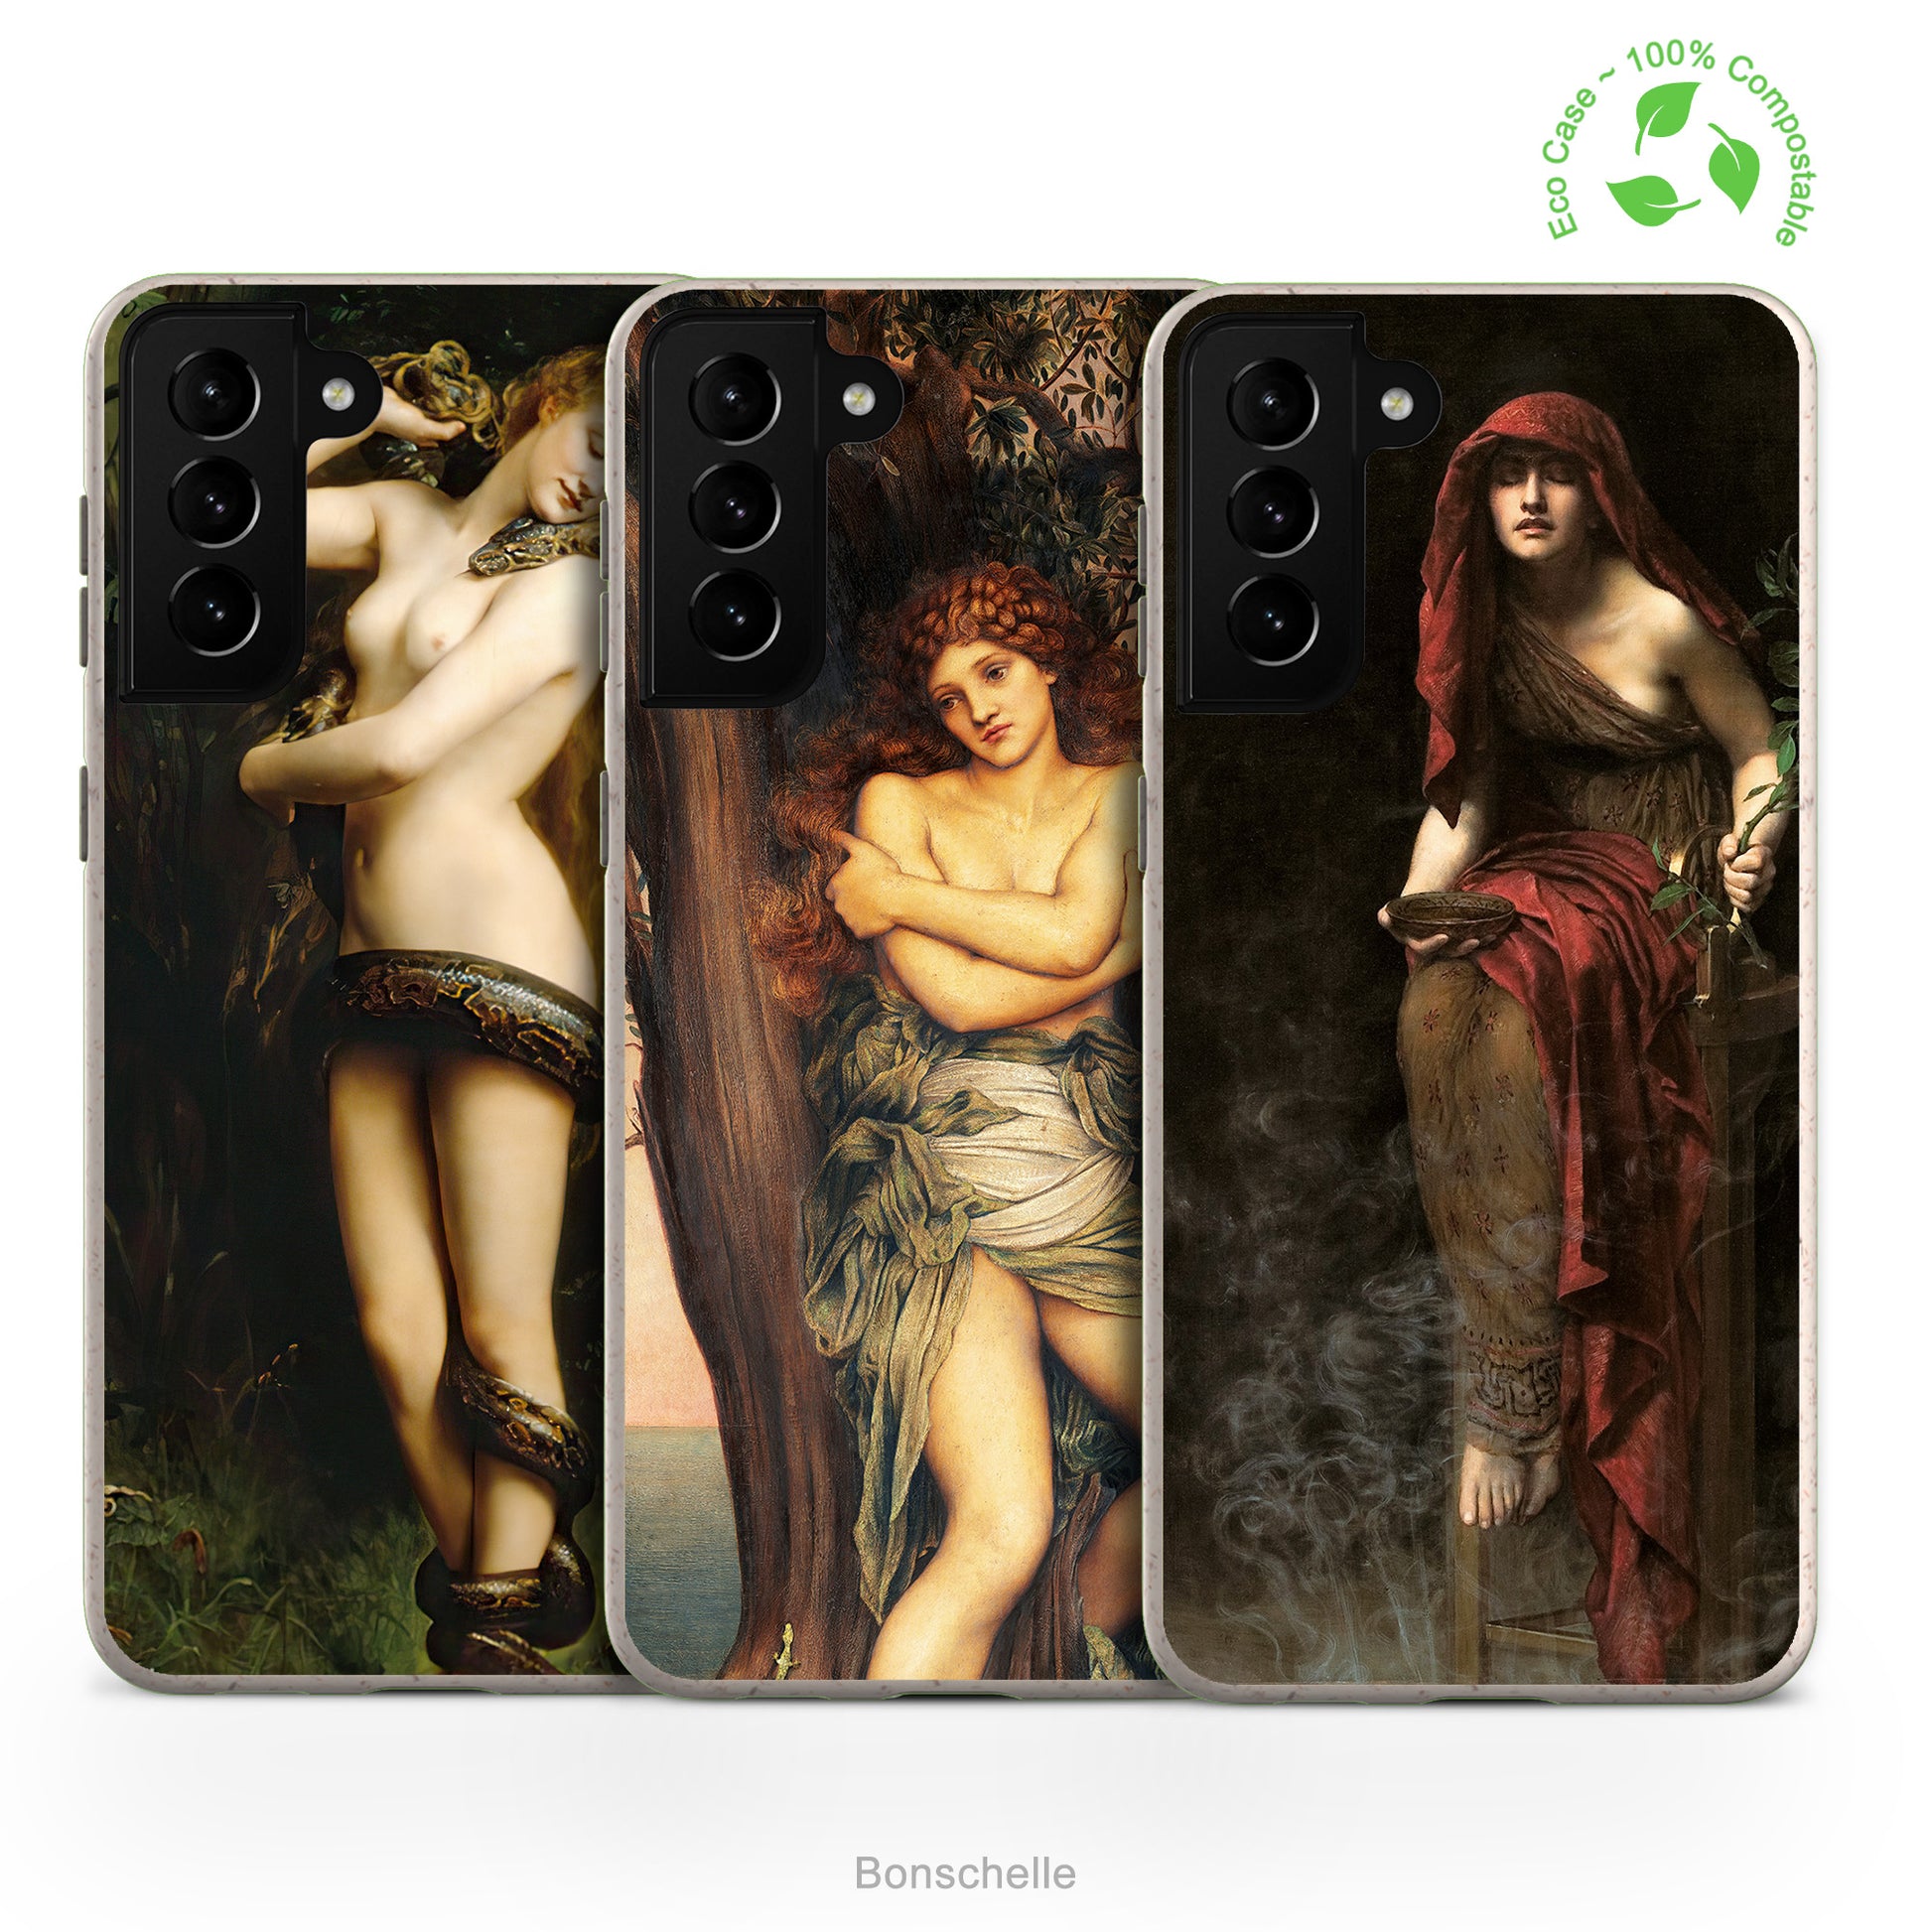 Ancient Gothic females, Eco Phone Cases for Samsung and iPhone with Pre-Raphaelite paintings by John Collier and Evelyn De Morgan